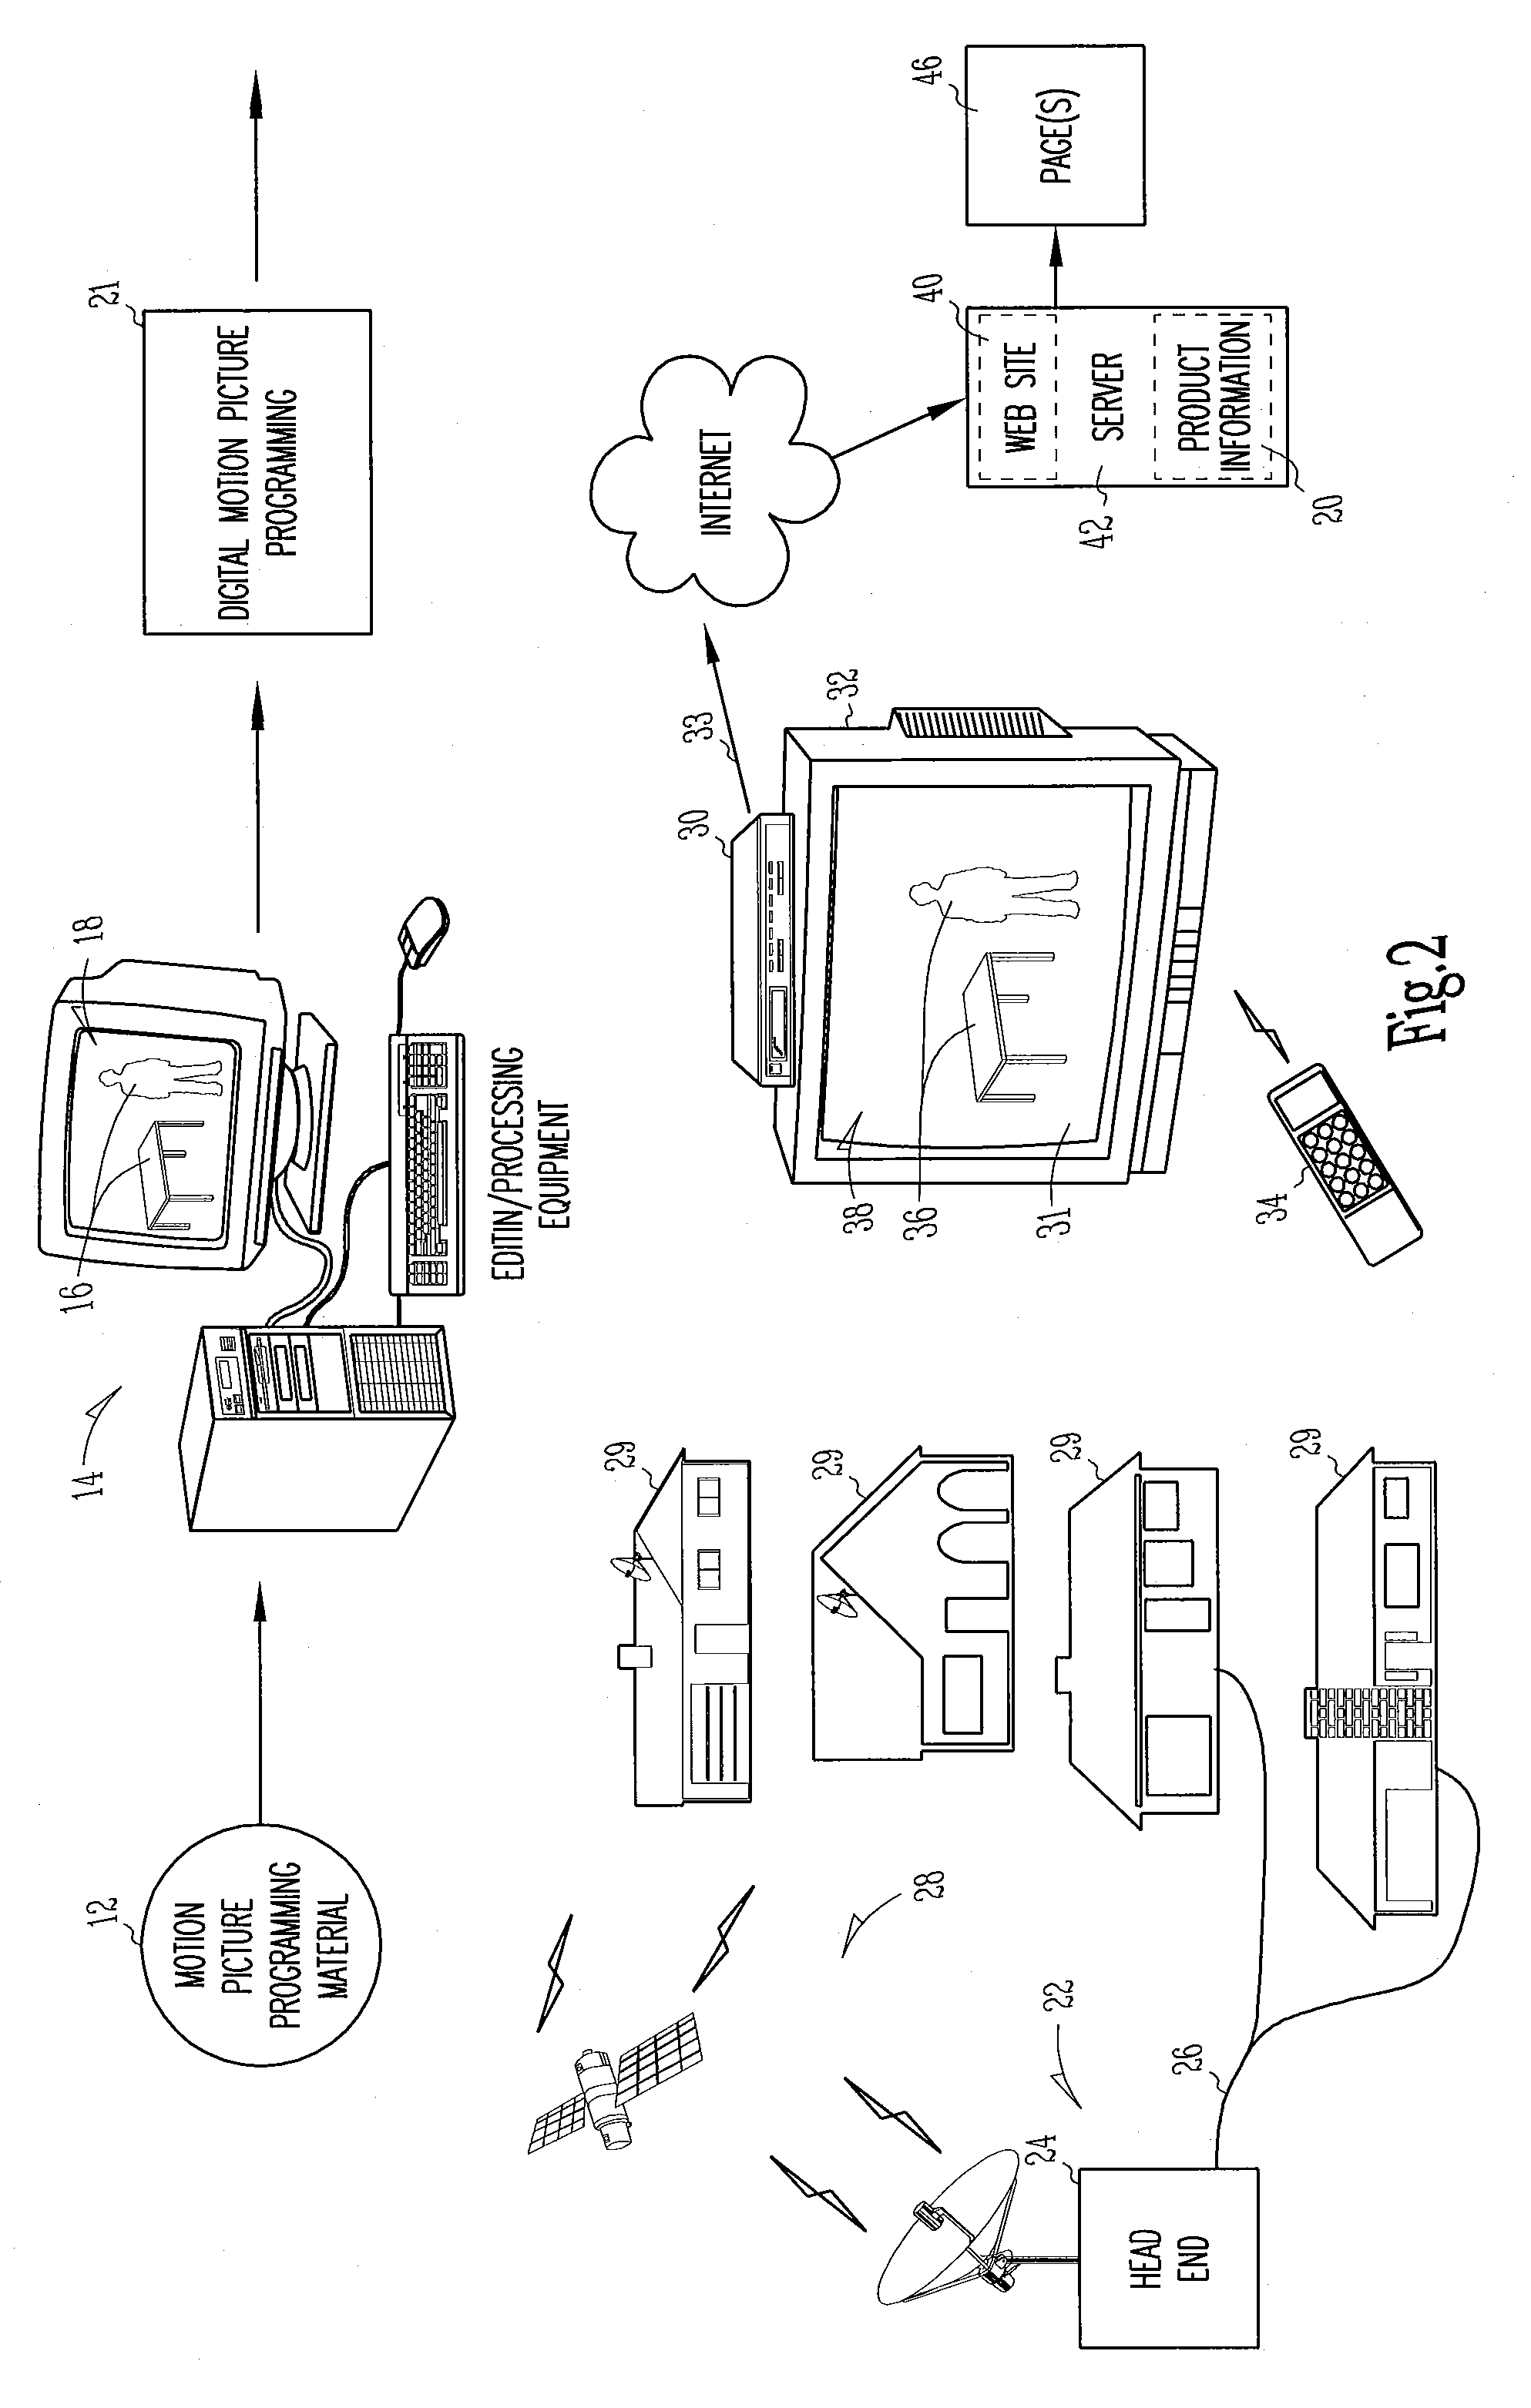 Method and apparatus for displaying information about a real world setting